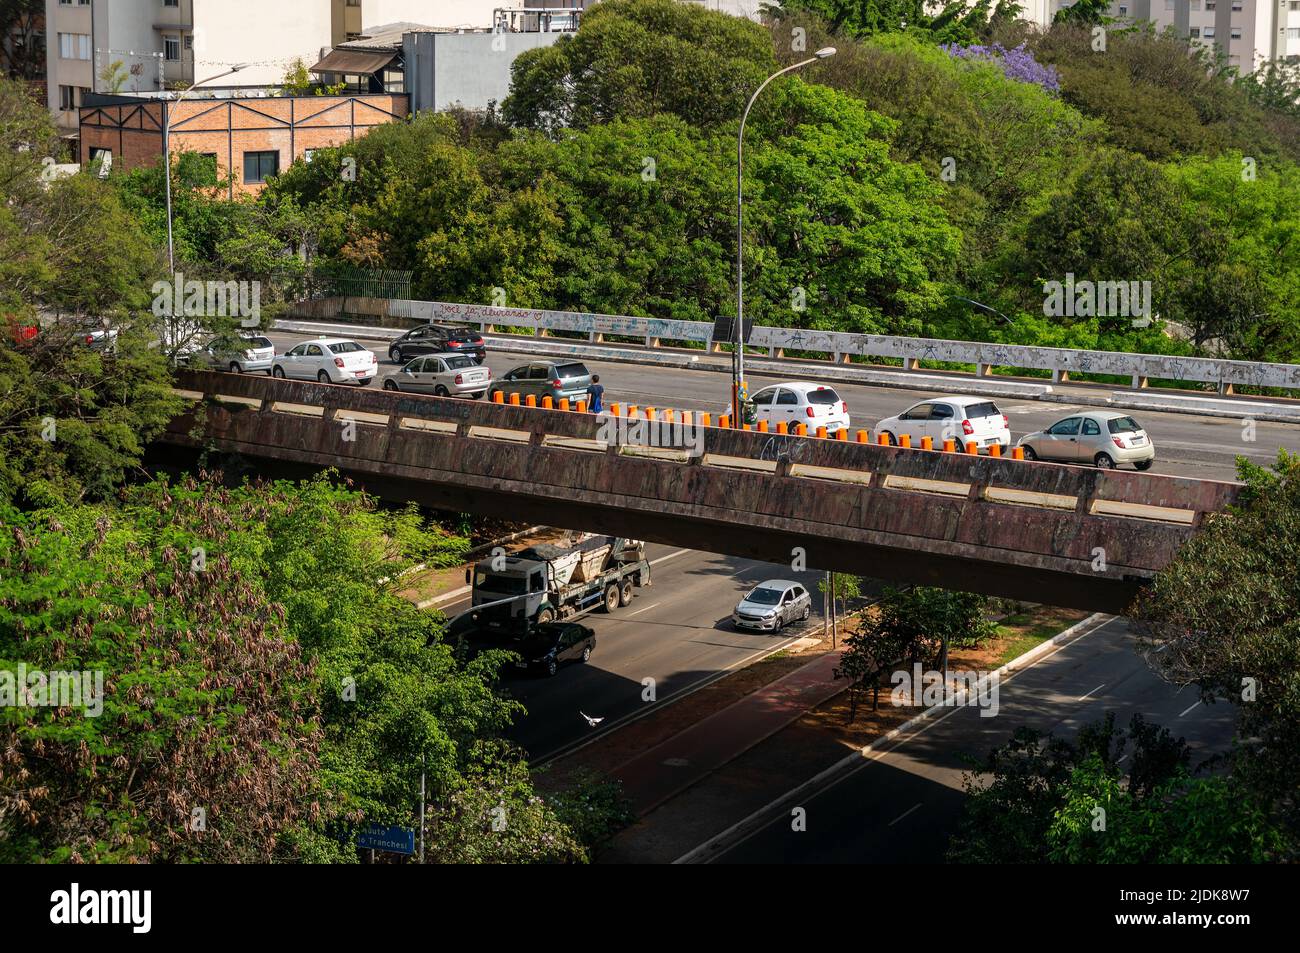 The Doutor Joao Tranchesi viaduct running over Paulo VI avenue surrounded by lots of green vegetation in Pinheiros district in a normal sunny day. Stock Photo